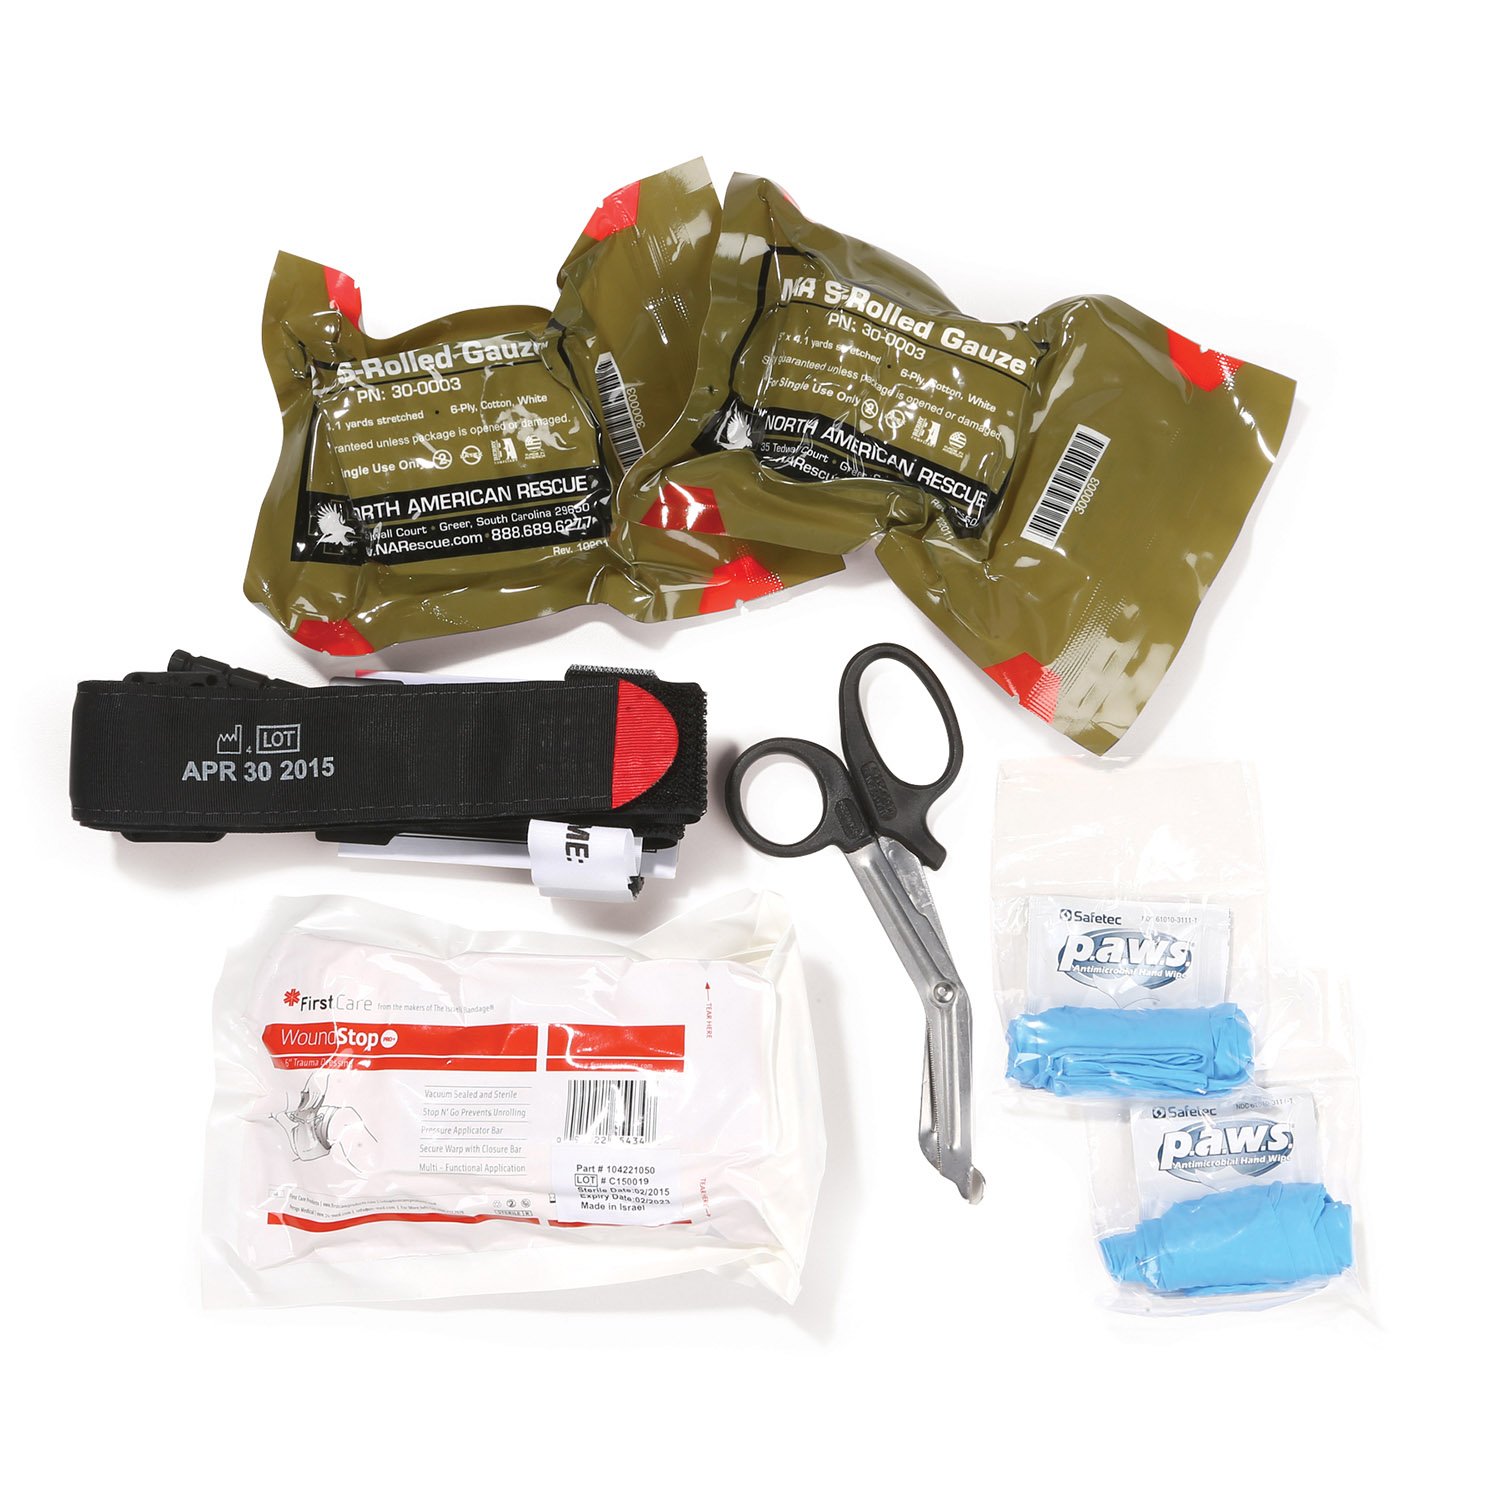 Personal Bleeding Management Kit with C-A-T